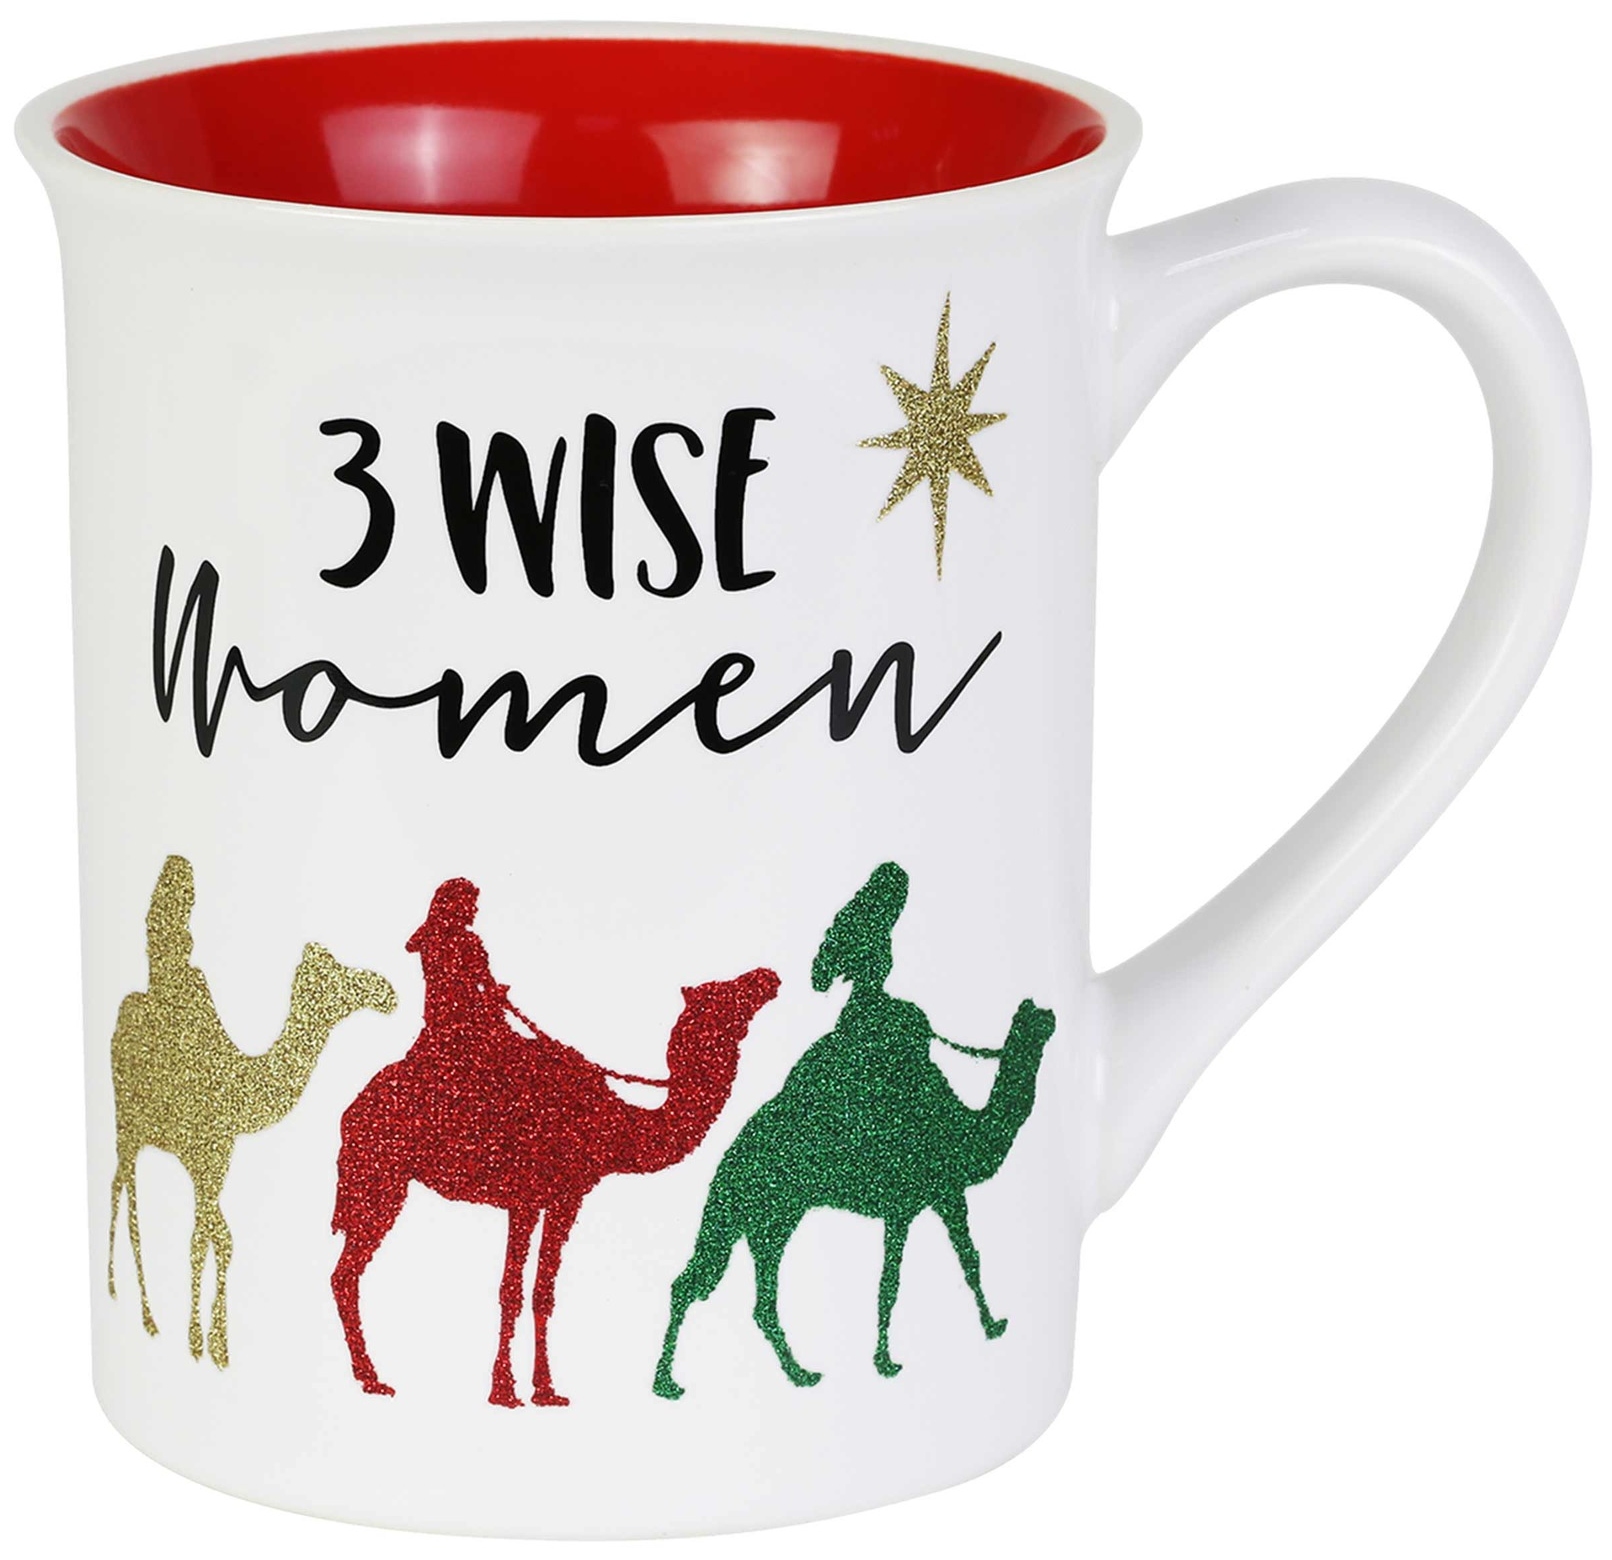 Our Name Is Mud 6005079 Glittery 3 Wise Women Mug Set of 2